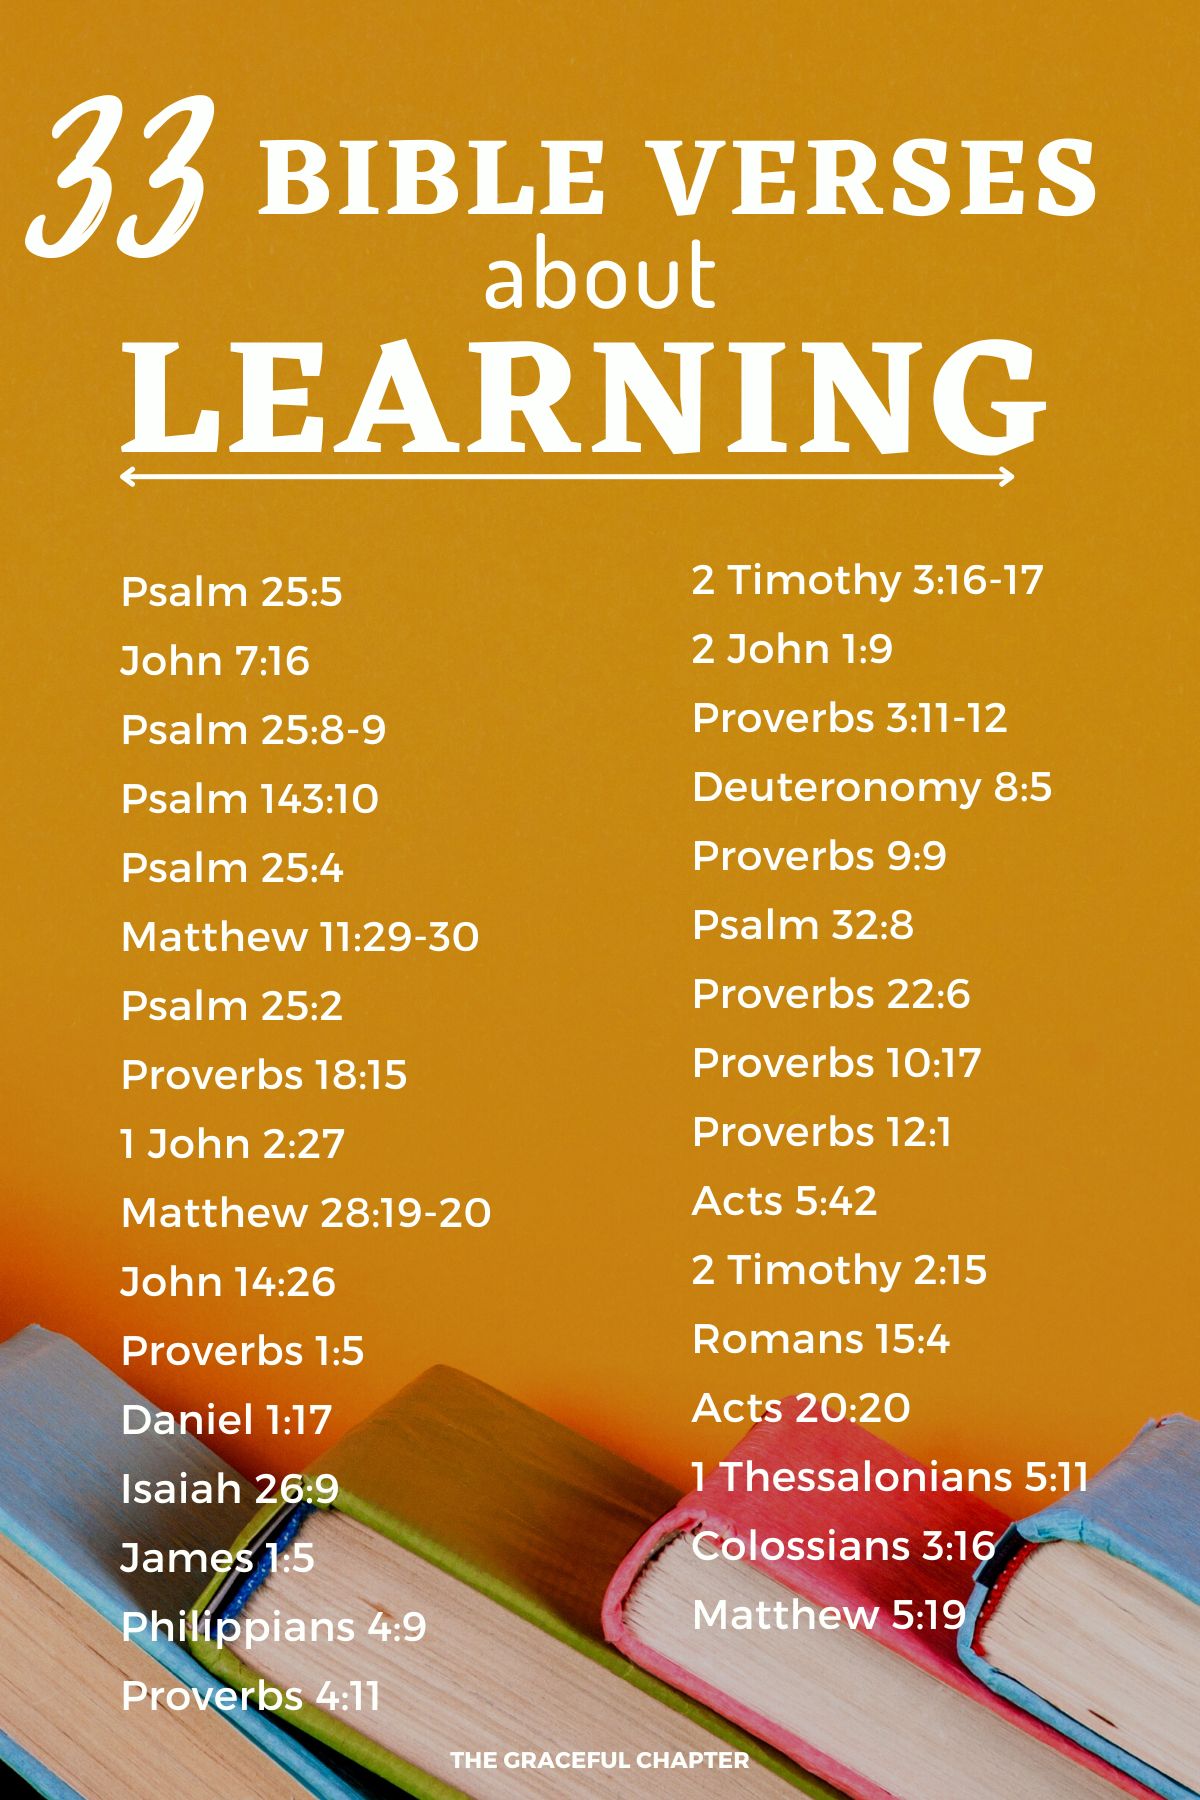 Bible verses about learning